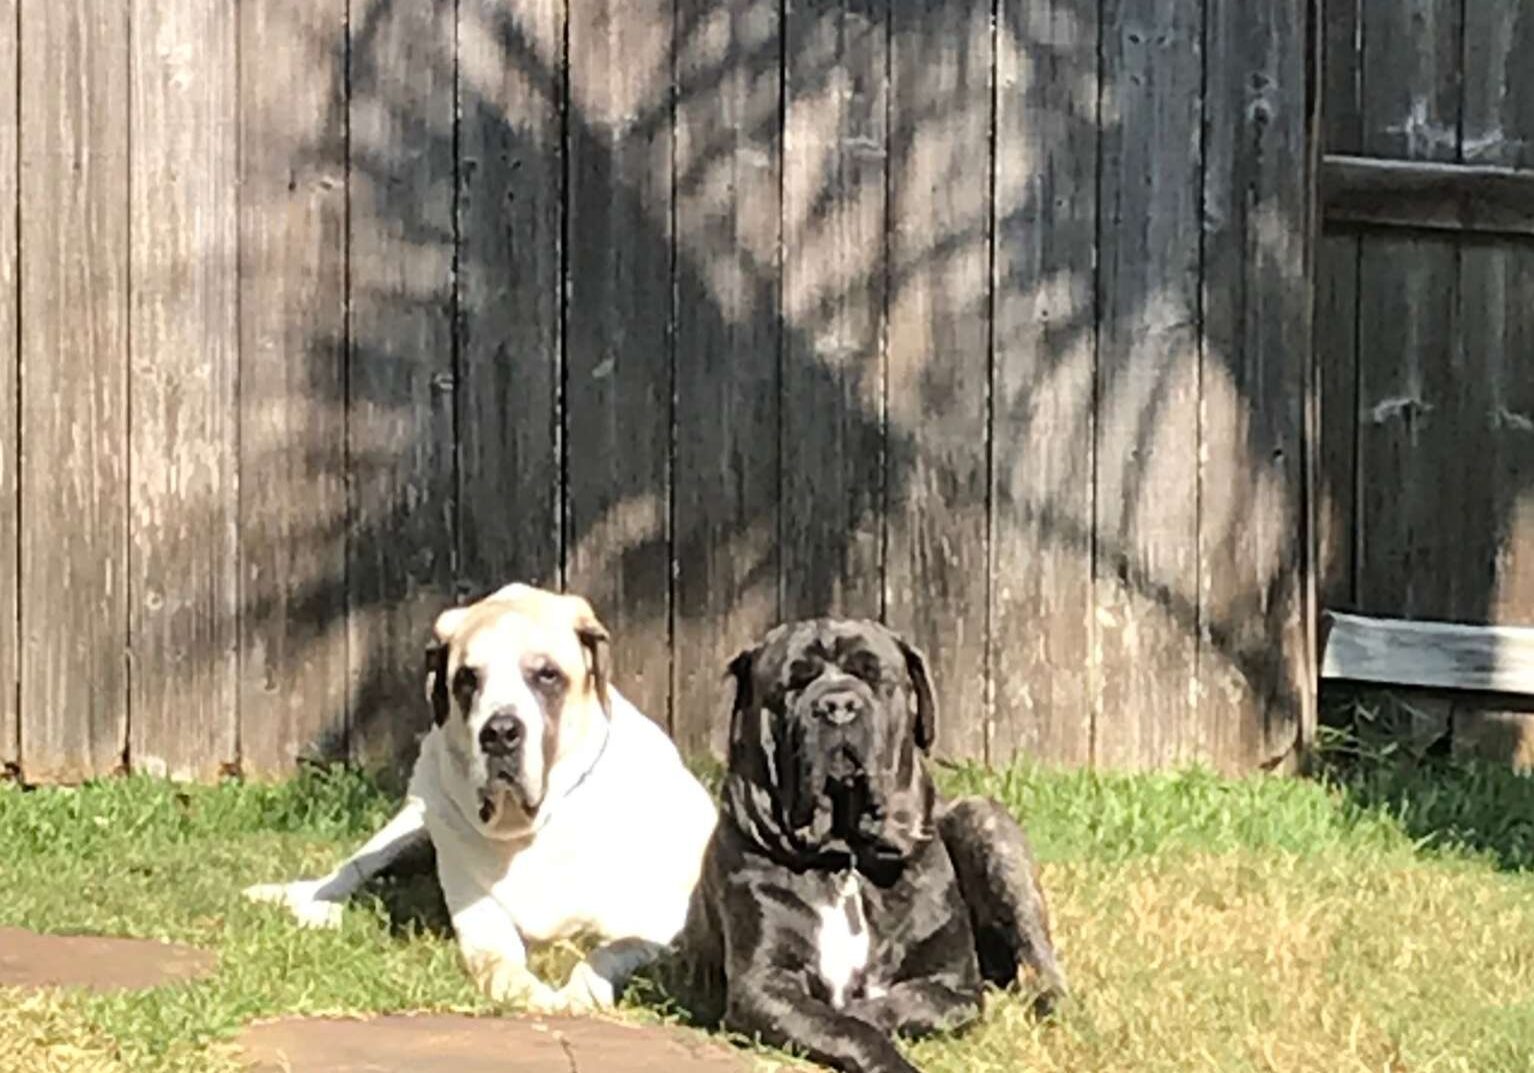 Two dogs by a fence.